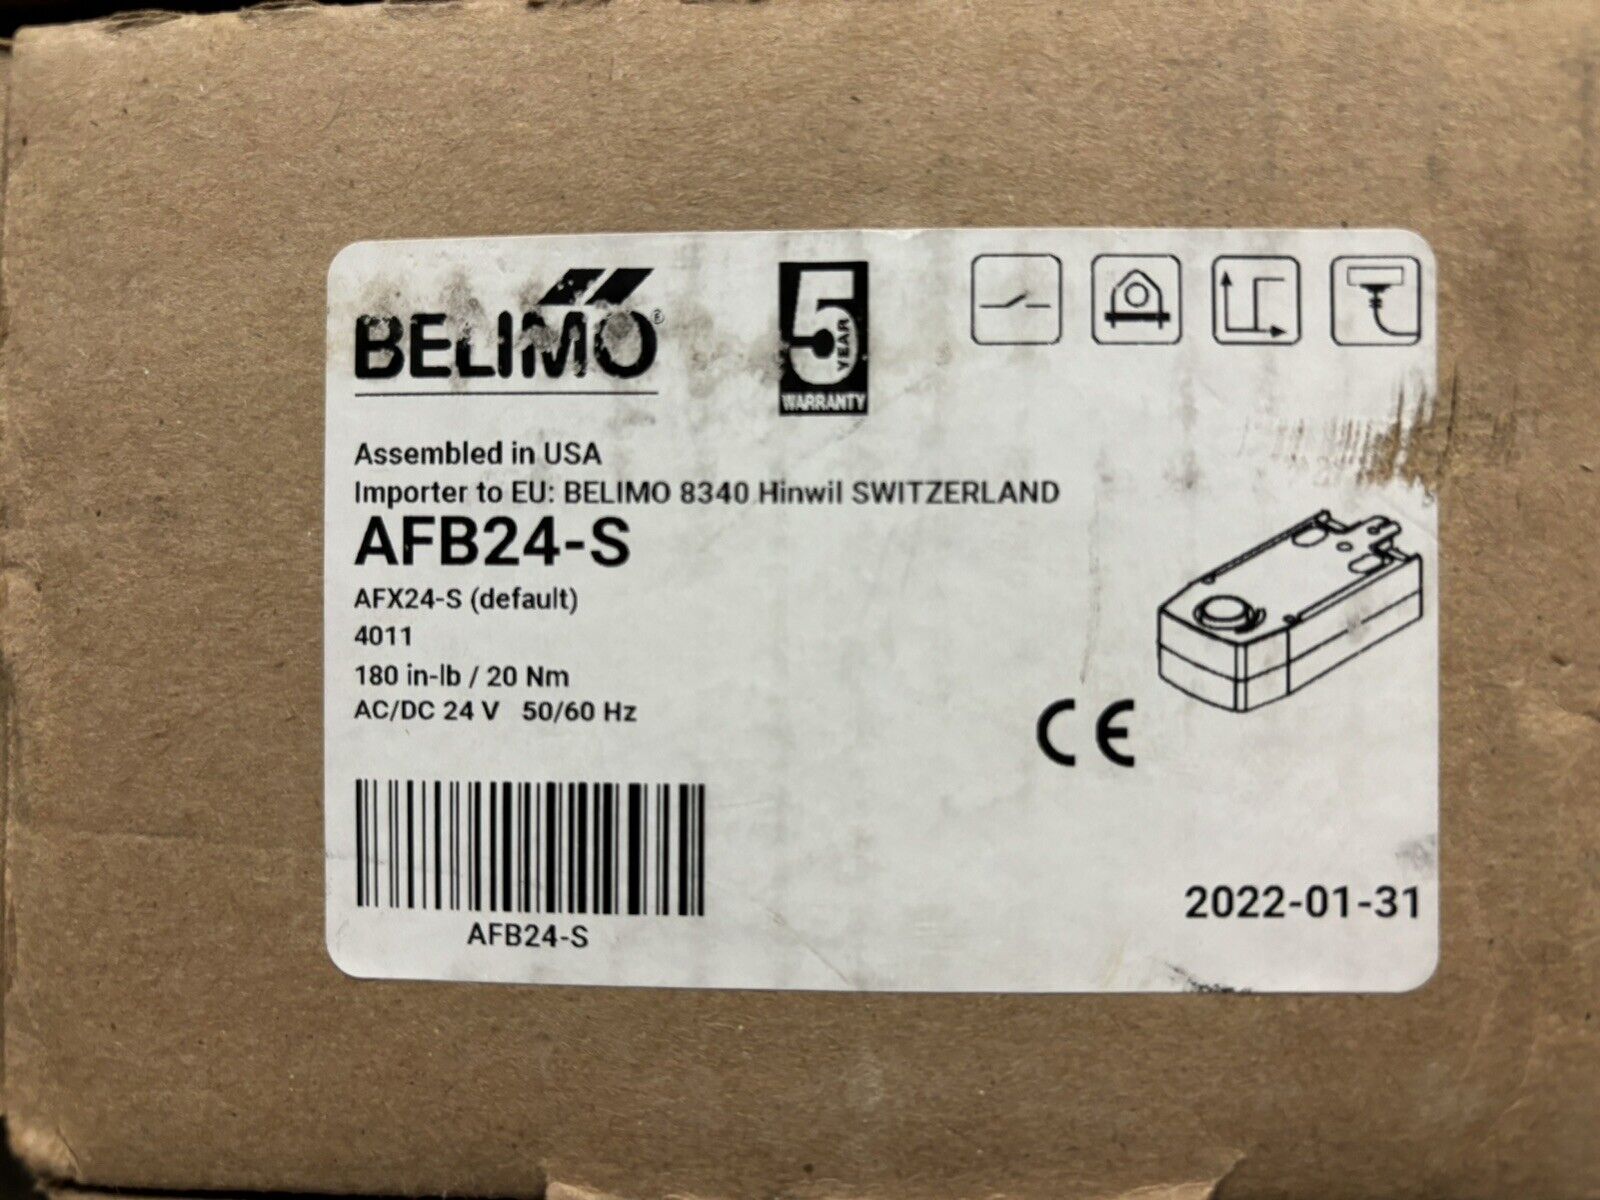 Belimo AFB24-S Spring Return Damper Actuator - New Open Box